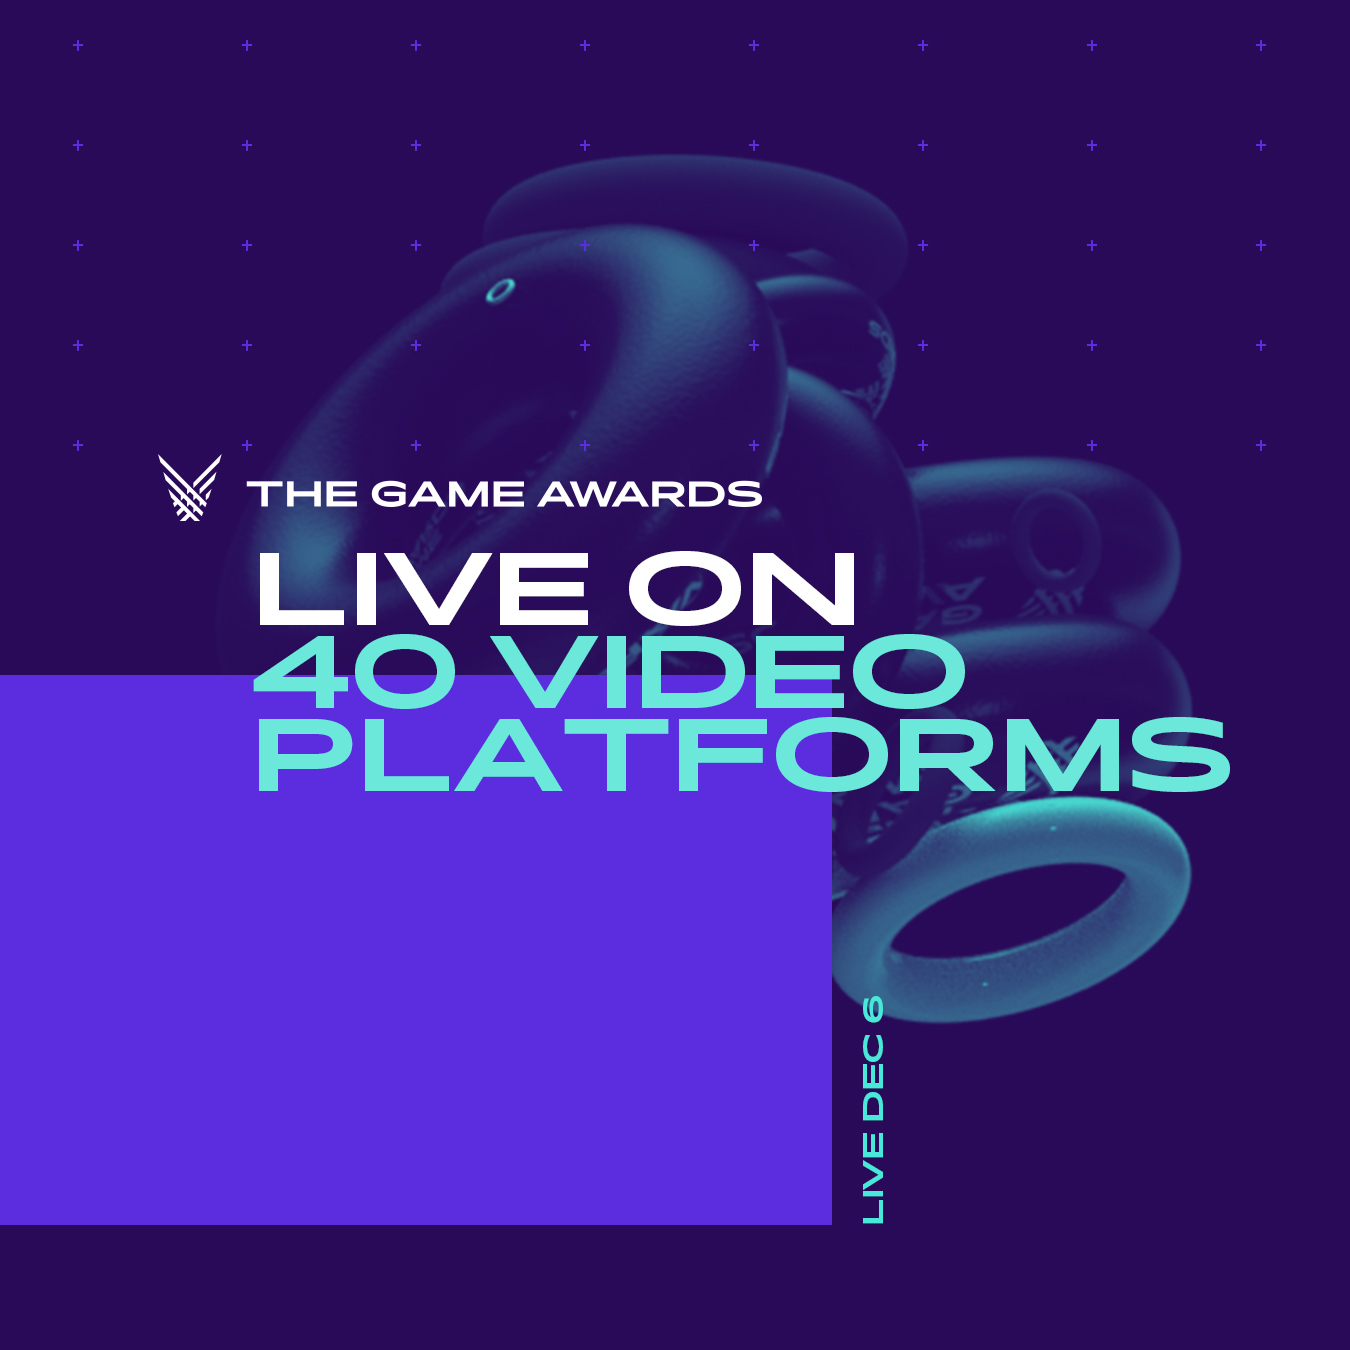 The Game Awards 2019: Start Time & How to Watch Online